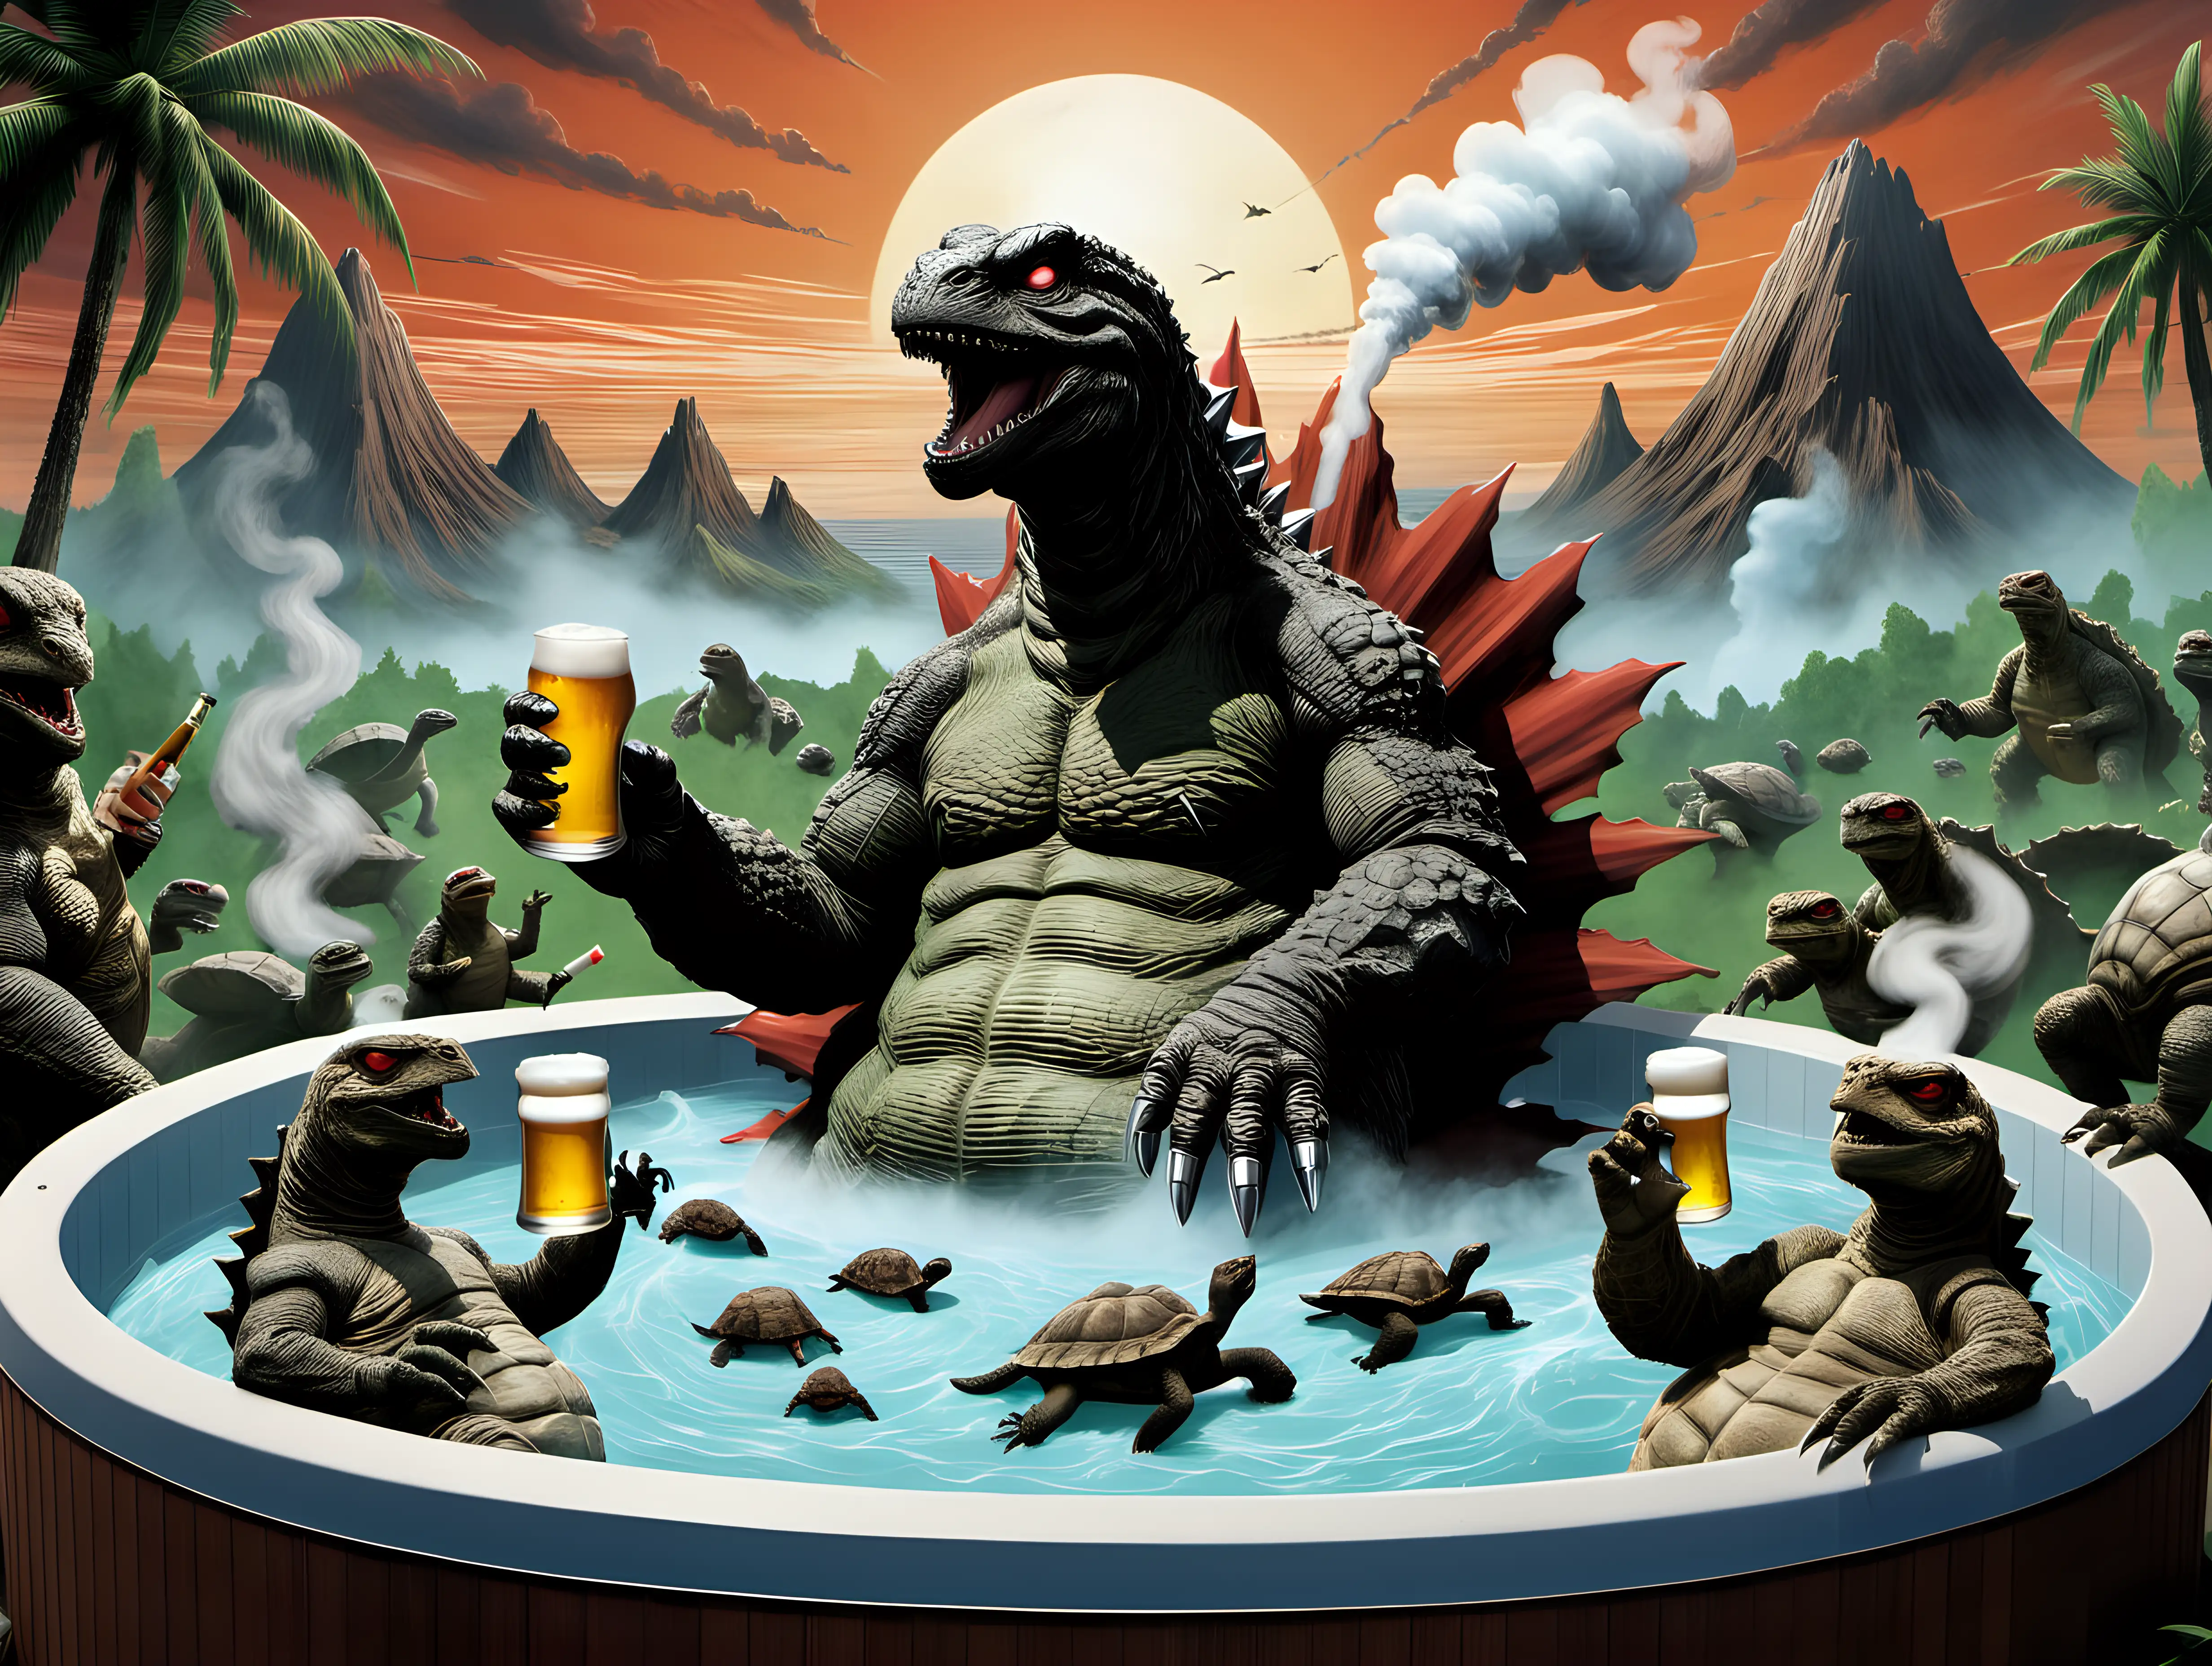 Godzilla in a hot tub with giant tortoises drinking a beer and smoking a joint